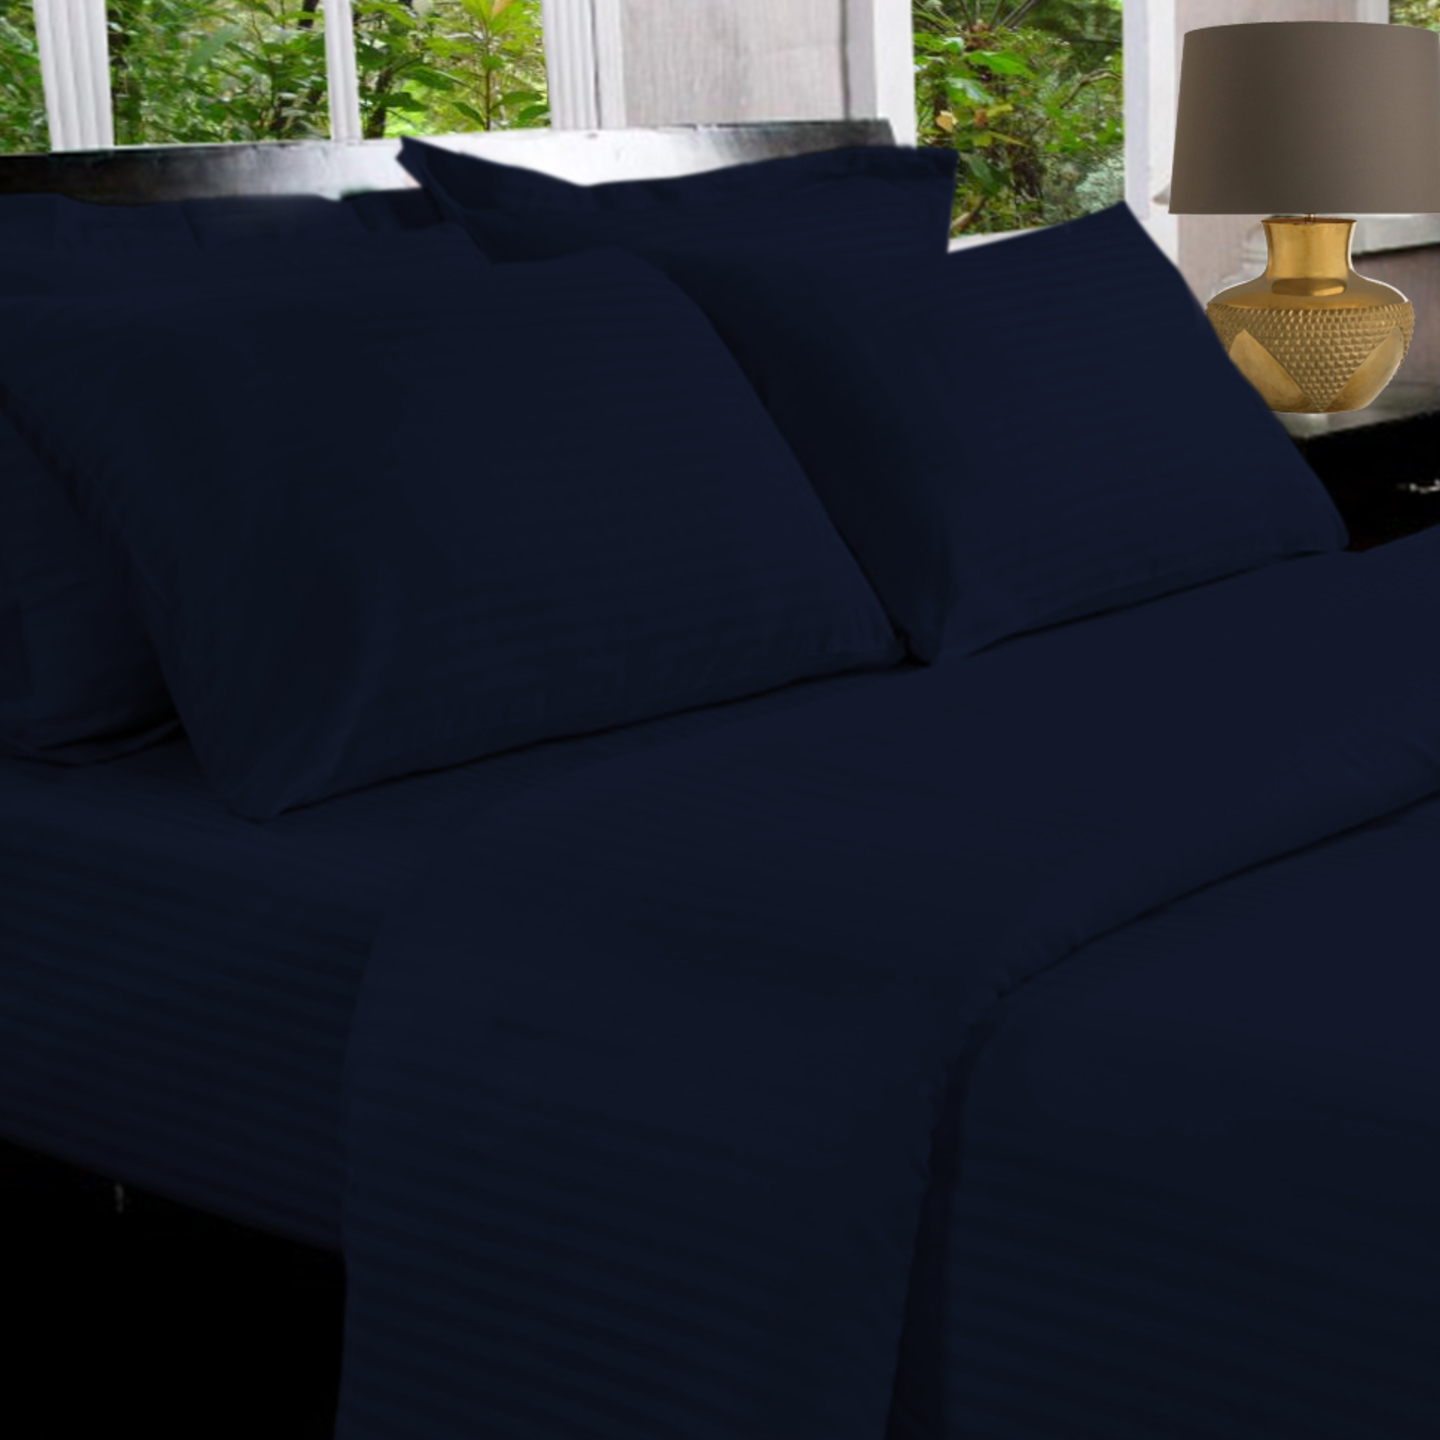 Dark Peacock Blue - 100% Cotton - 330 Thread Count - Sateen Fitted Sheet - King Size 